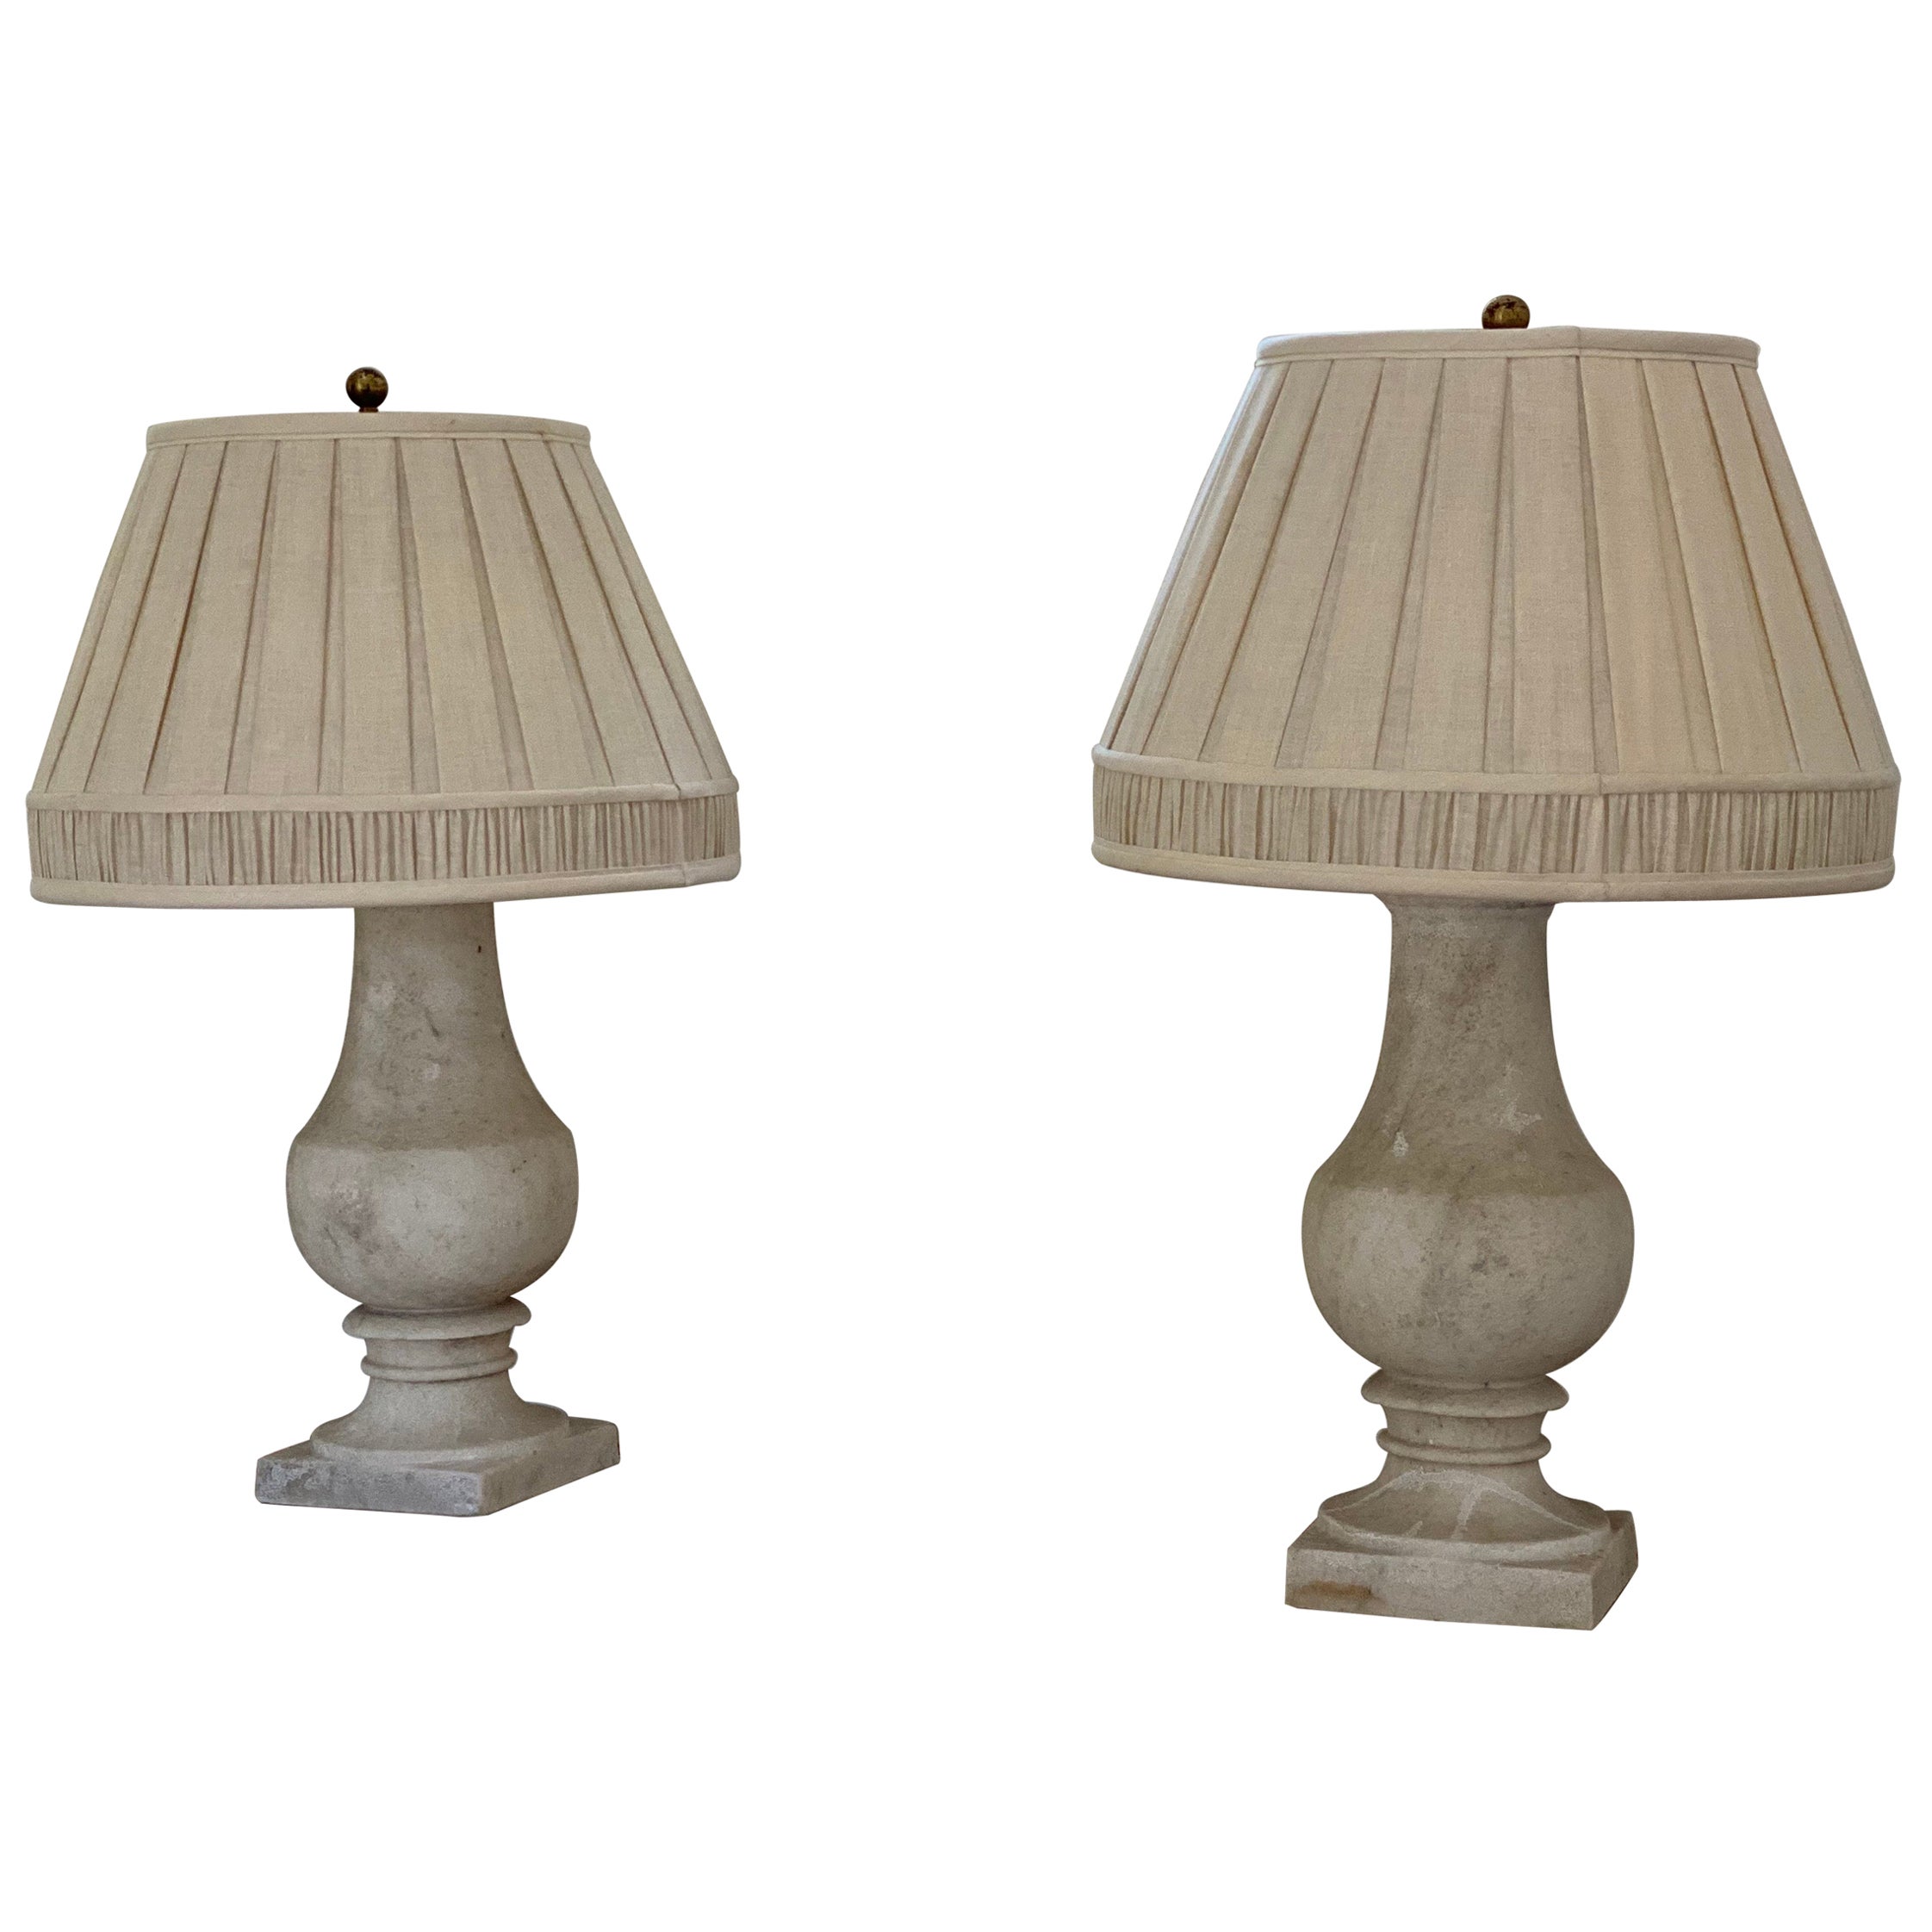 What is a stone lamp?